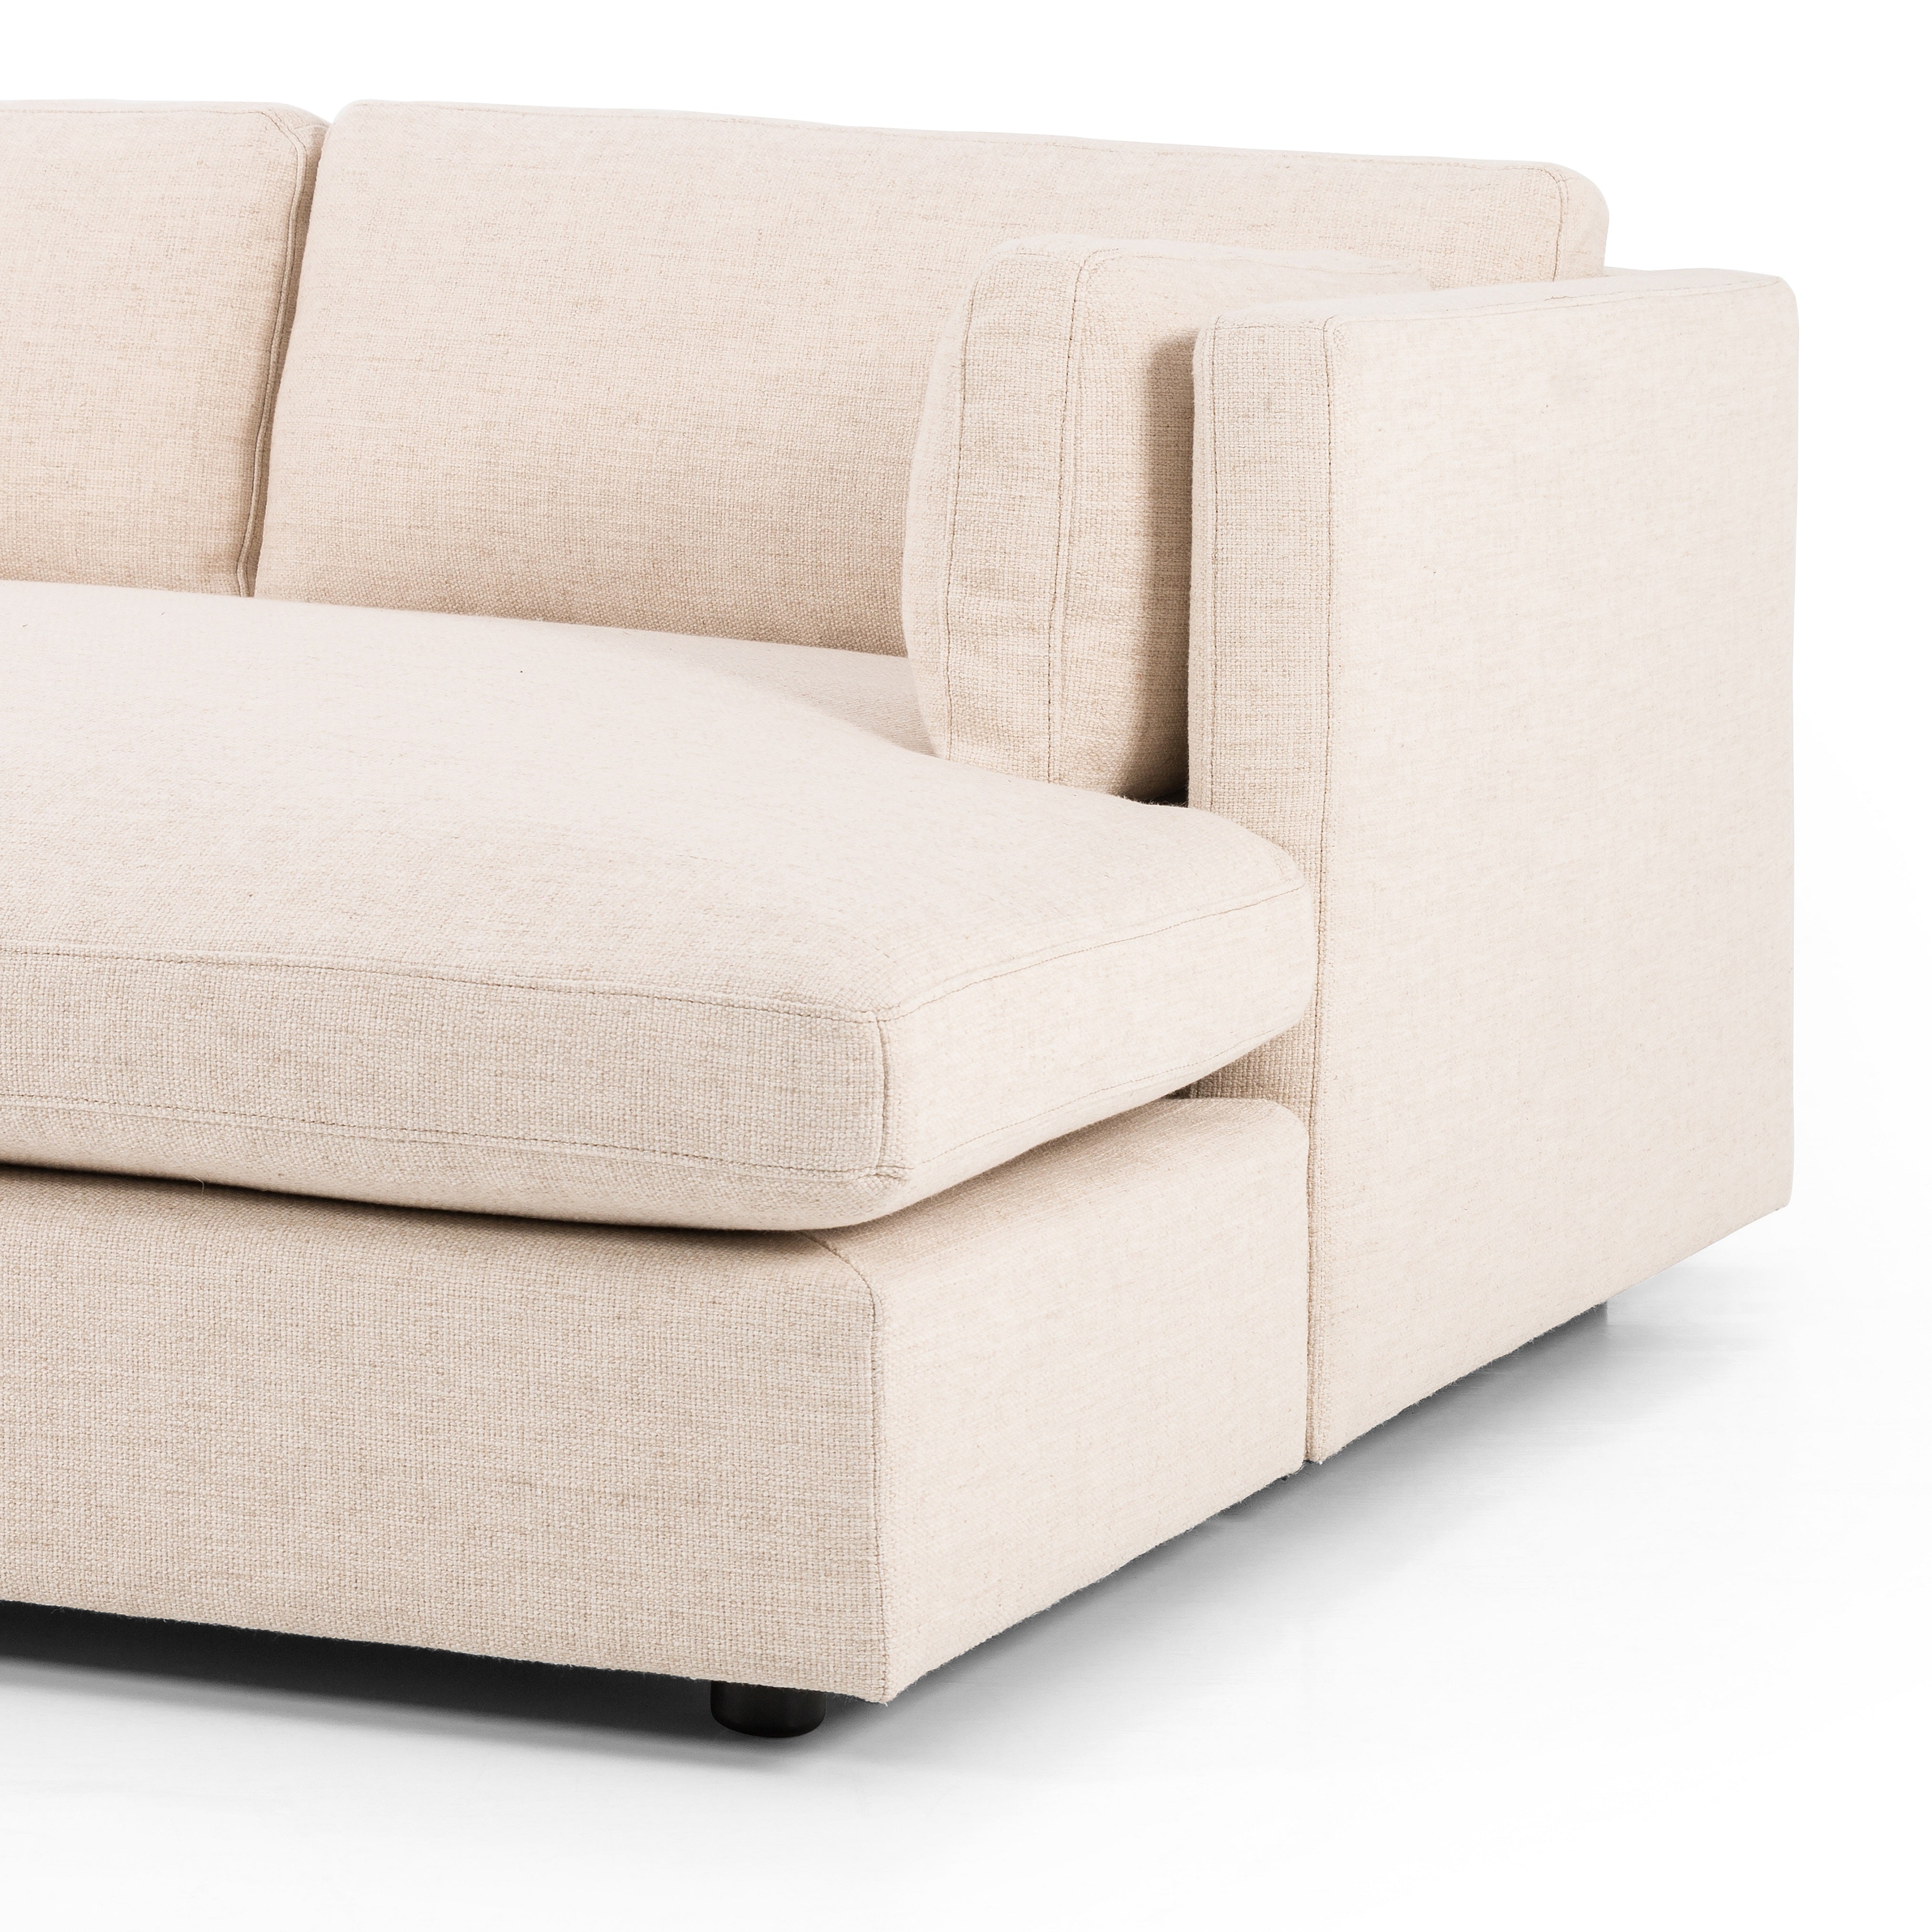 Archer Media Sofa is upholstered in a cream high-performance fabric, invitingly wide and just as comfy. Perfect for movie nights. Performance fabrics are specially created to withstand spills, stains, high traffic, and wear, ensuring long-term comfort and unmatched durability. Amethyst Home provides interior design services, furniture, rugs, and lighting in the Omaha metro area.